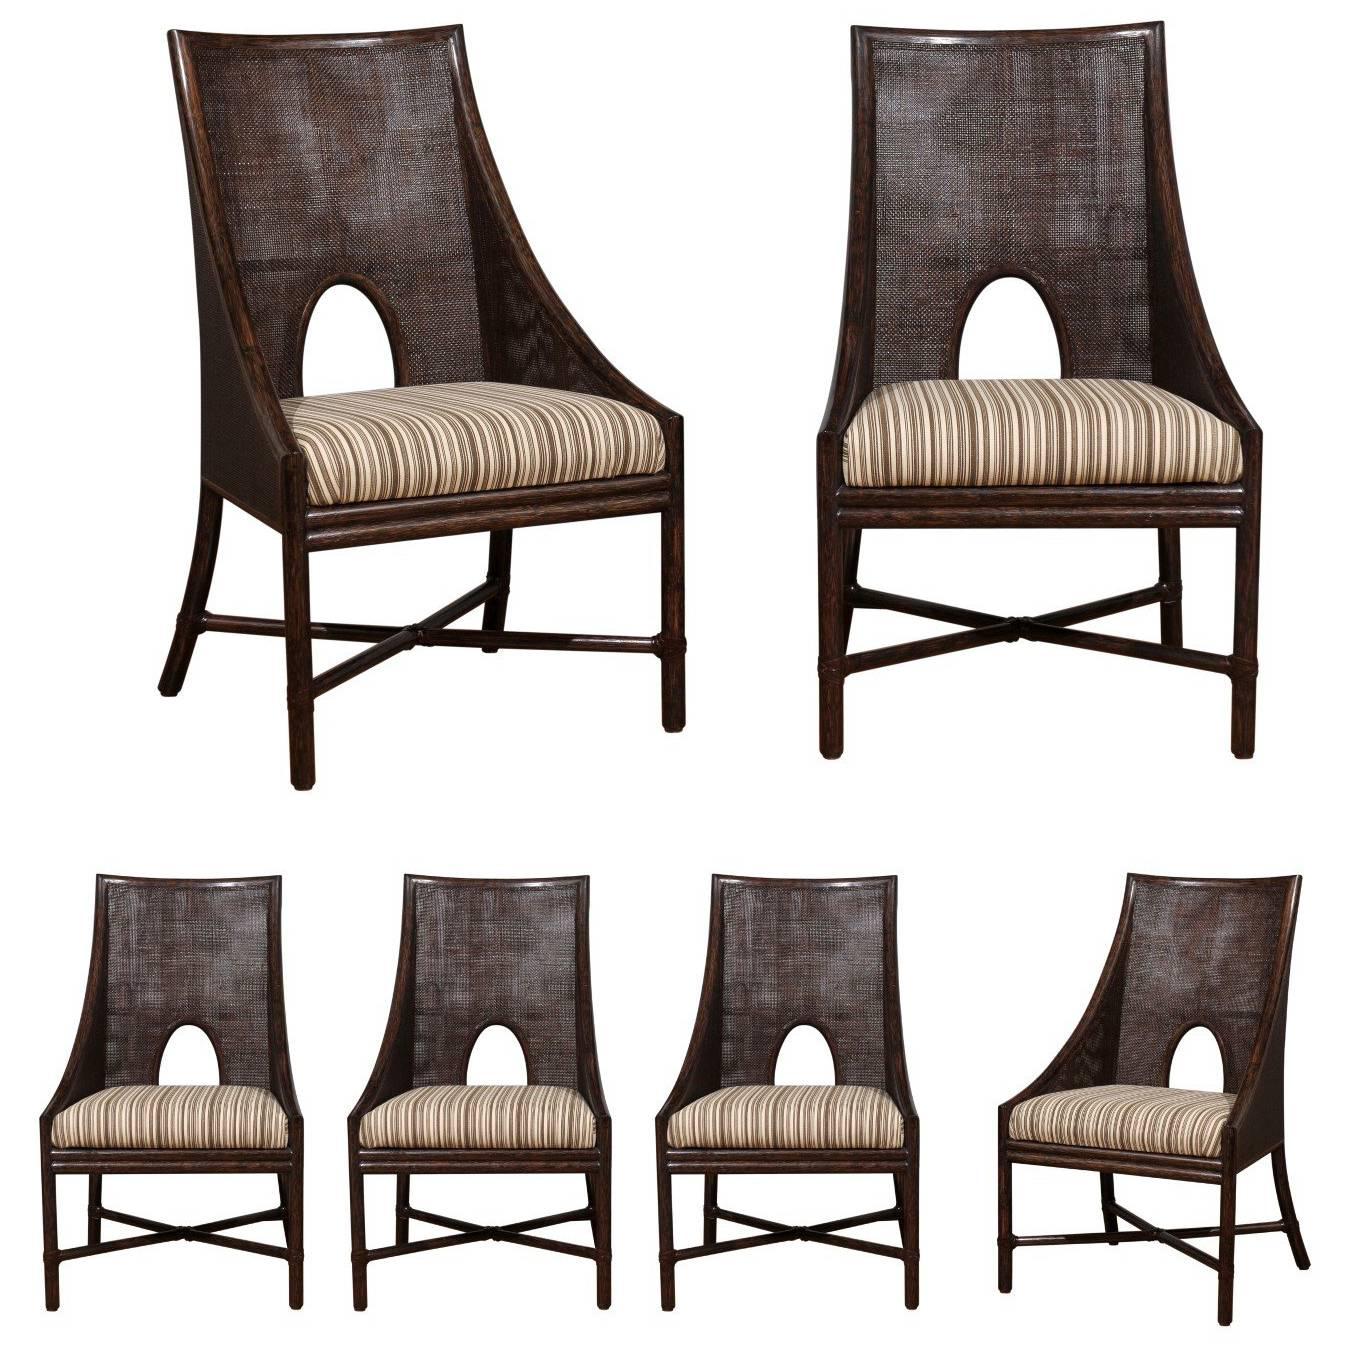 Elegant Set of Six Rattan and Cane Dining Chairs by McGuire